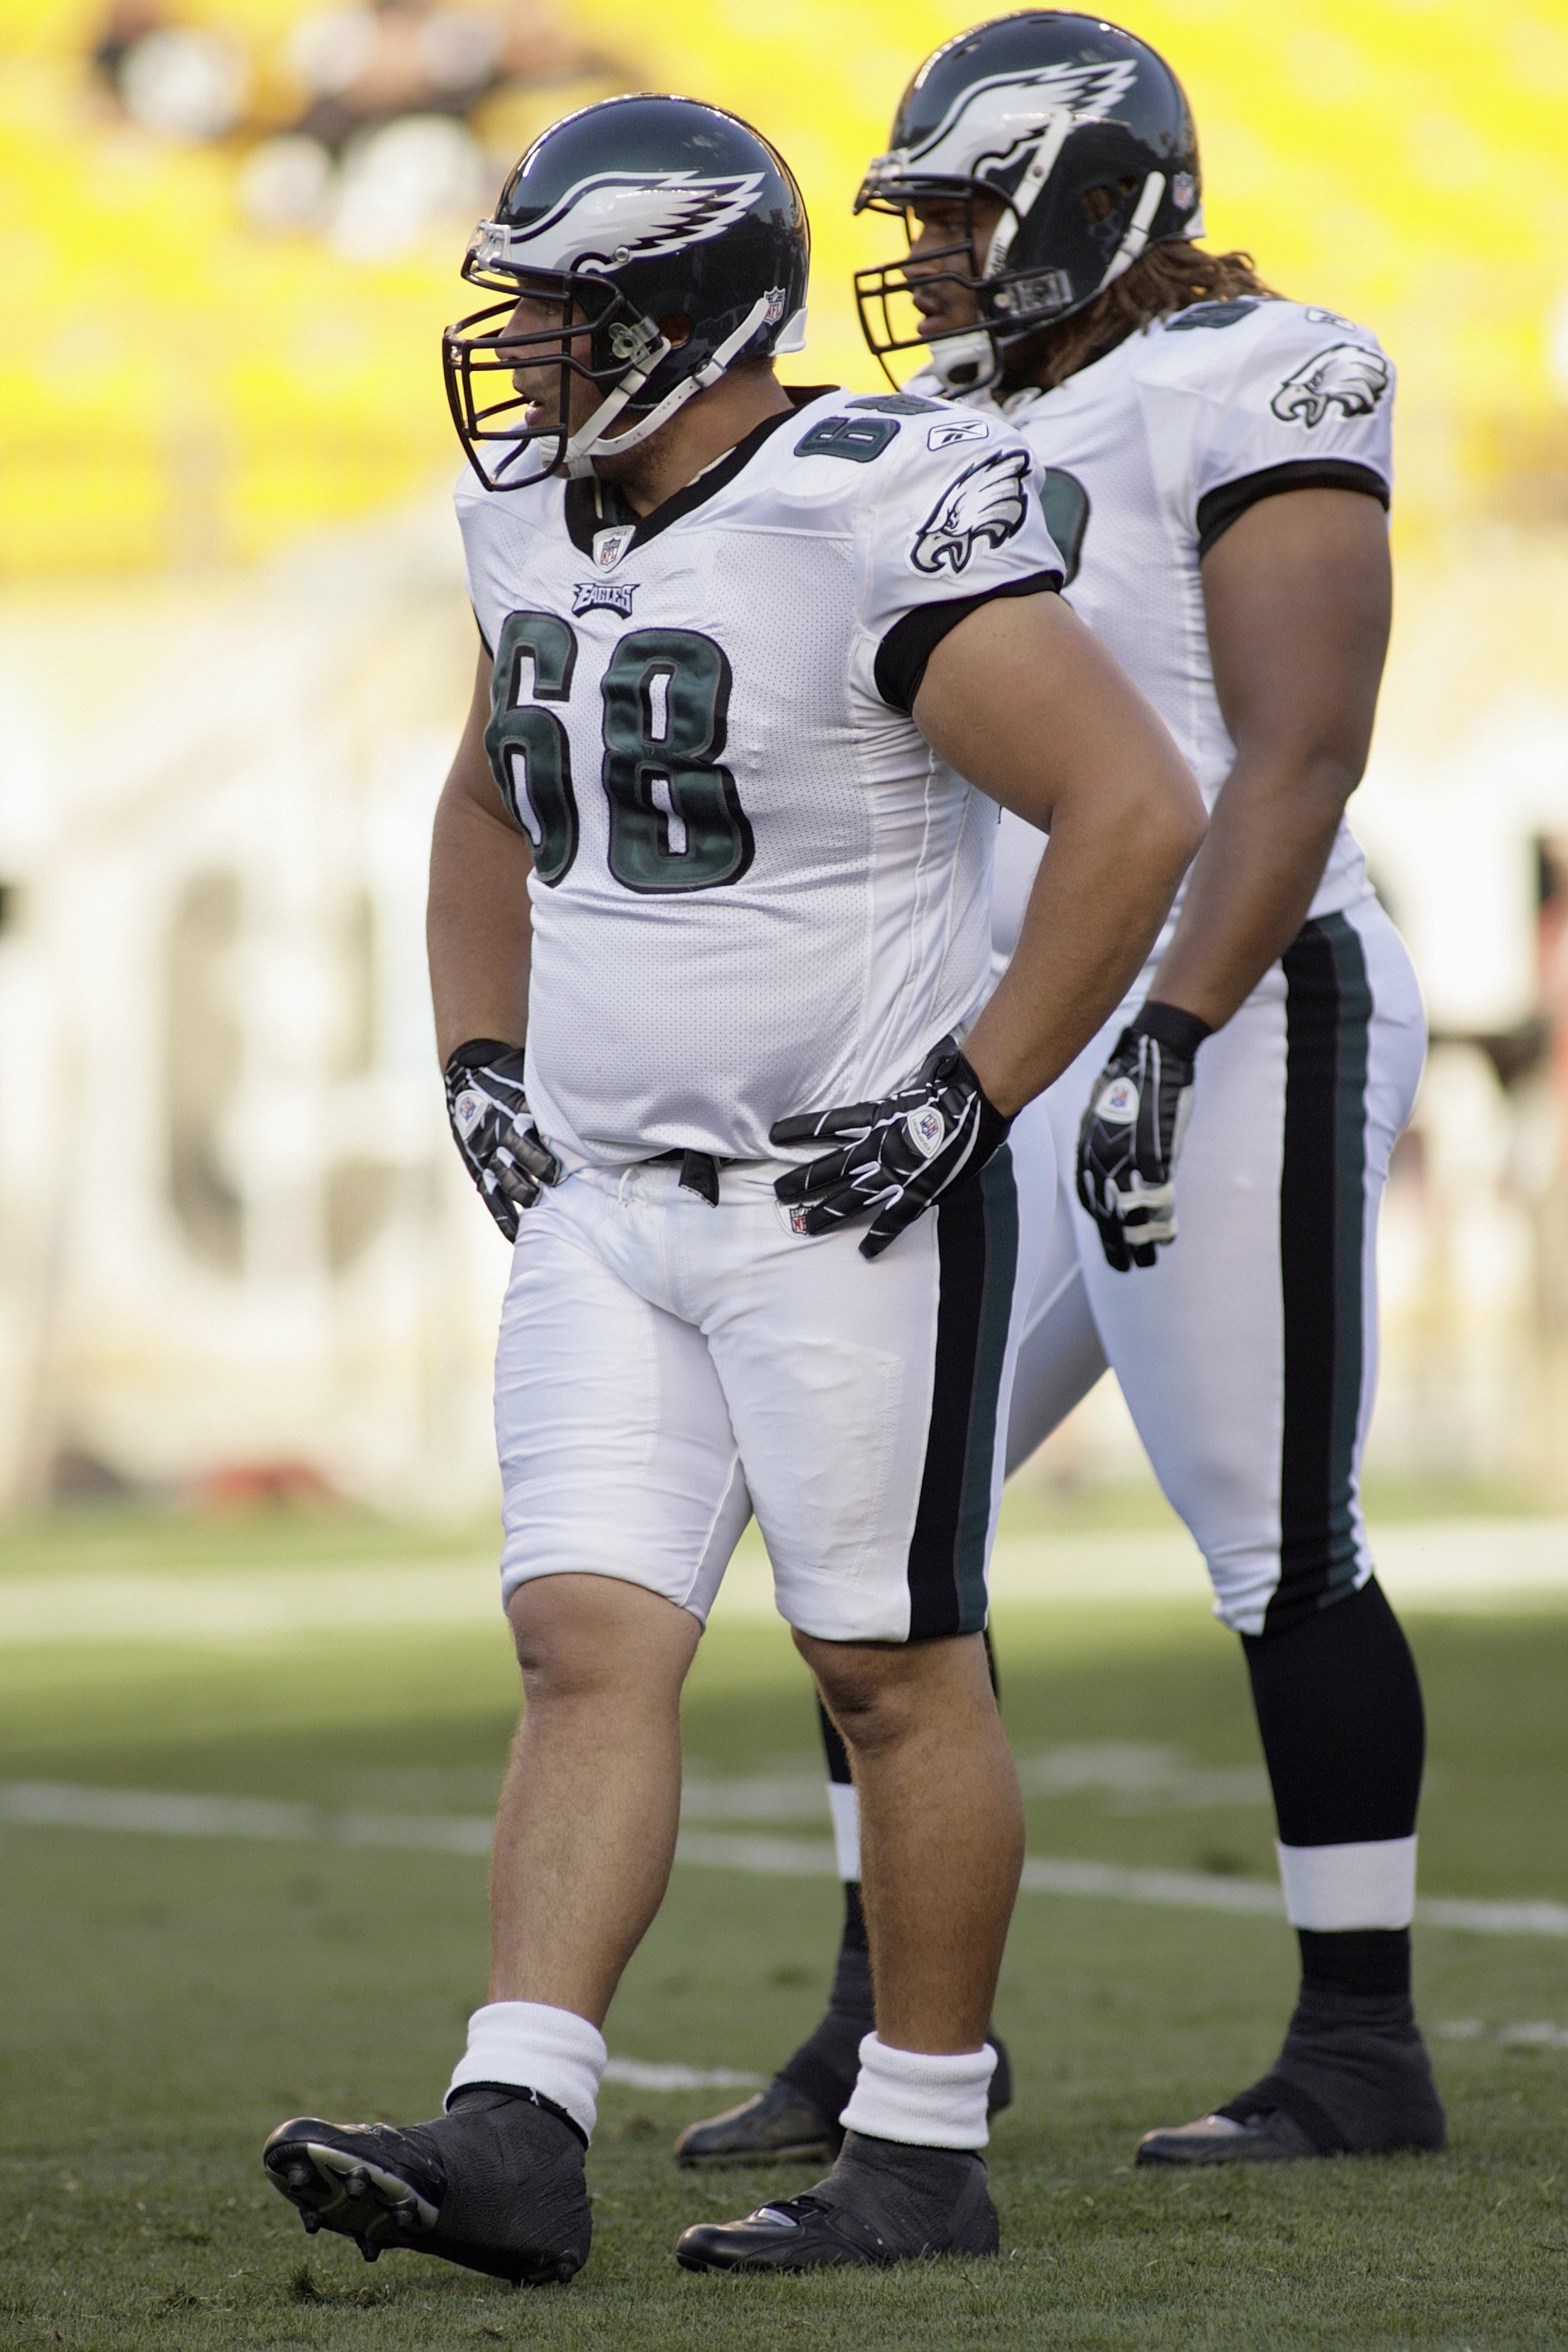 PITTSBURGH - AUGUST 8:  Mike McGlynn #68 of the Philadelphia Eagles looks on during a preseason game against the Pittsburgh Steelers on August 8, 2008 at Heinz Field in Pittsburgh, Pennsylvania. (Photo by Rick Stewart/Getty Images)